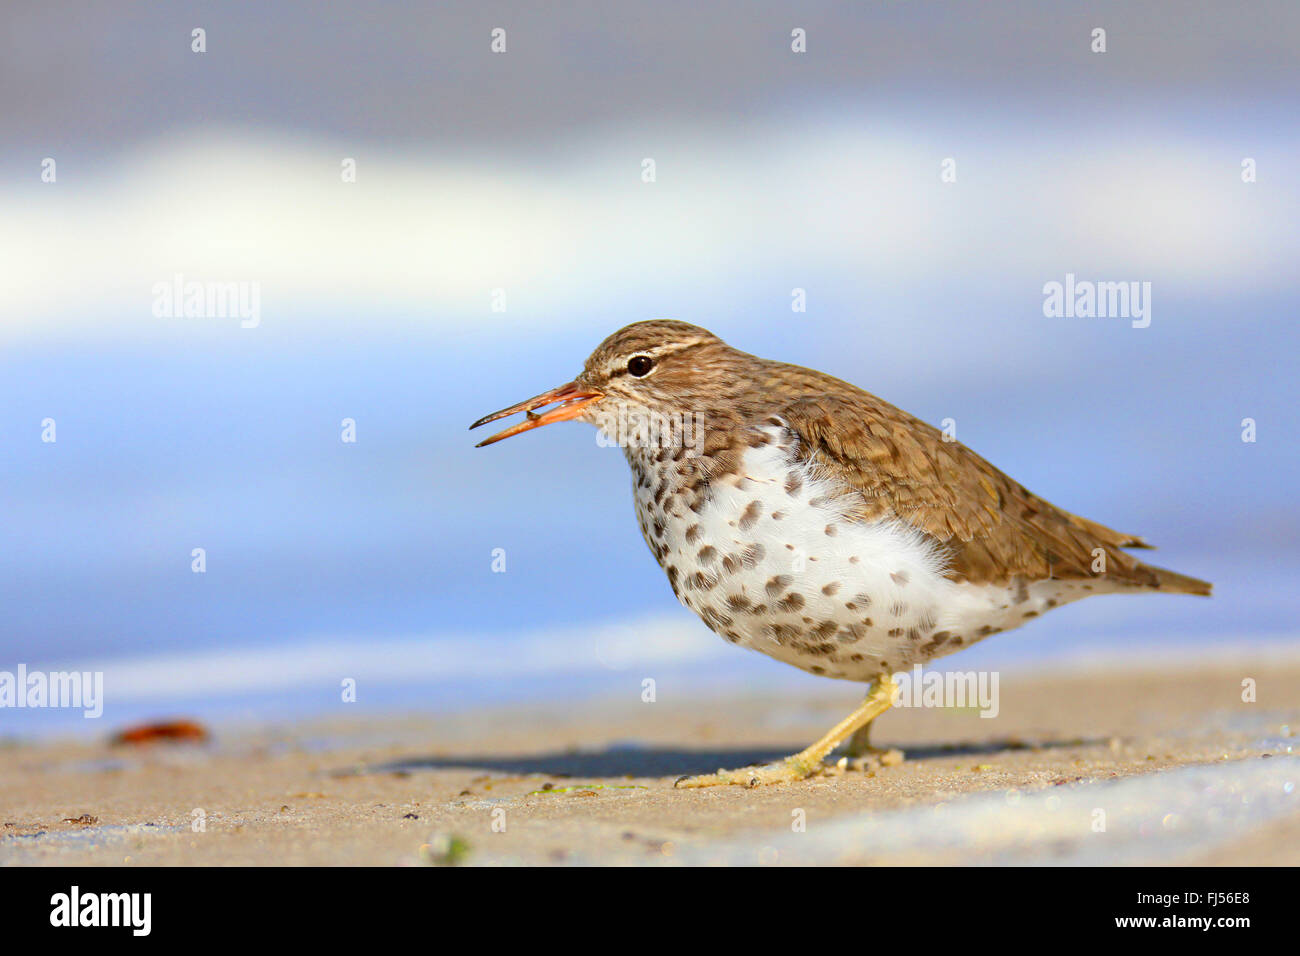 Spotted sandpiper (Actitis macularius), in breeding dress standing at the shore and eating an insect, Netherlands, Frisia Stock Photo